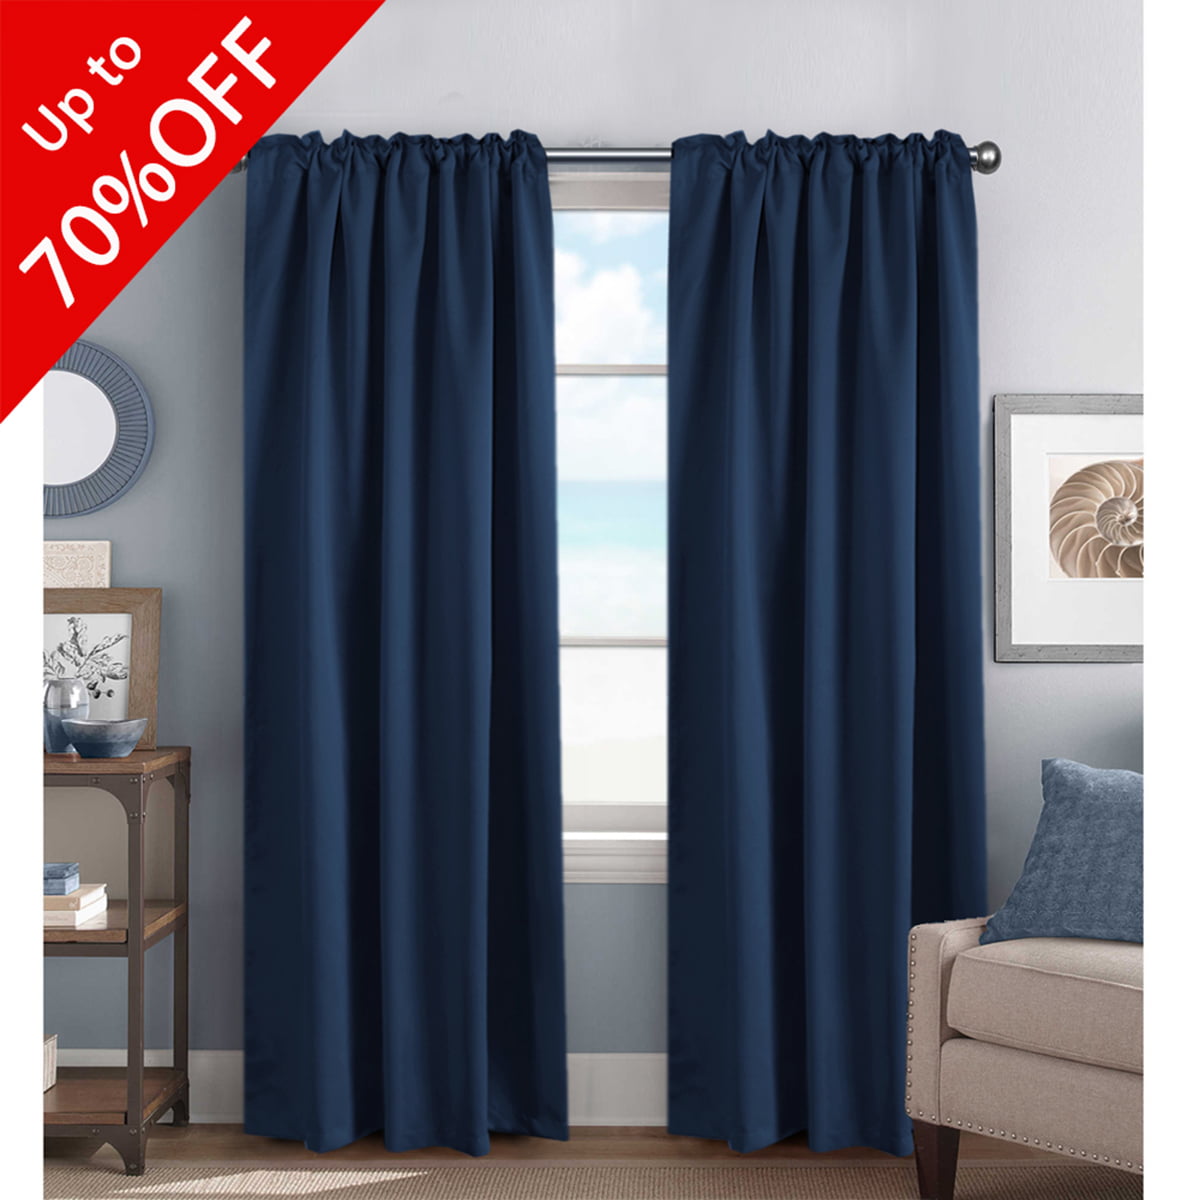 Navy Curtains Blackout Thermal Insulated Curtain Panels, Back Tab / Rod